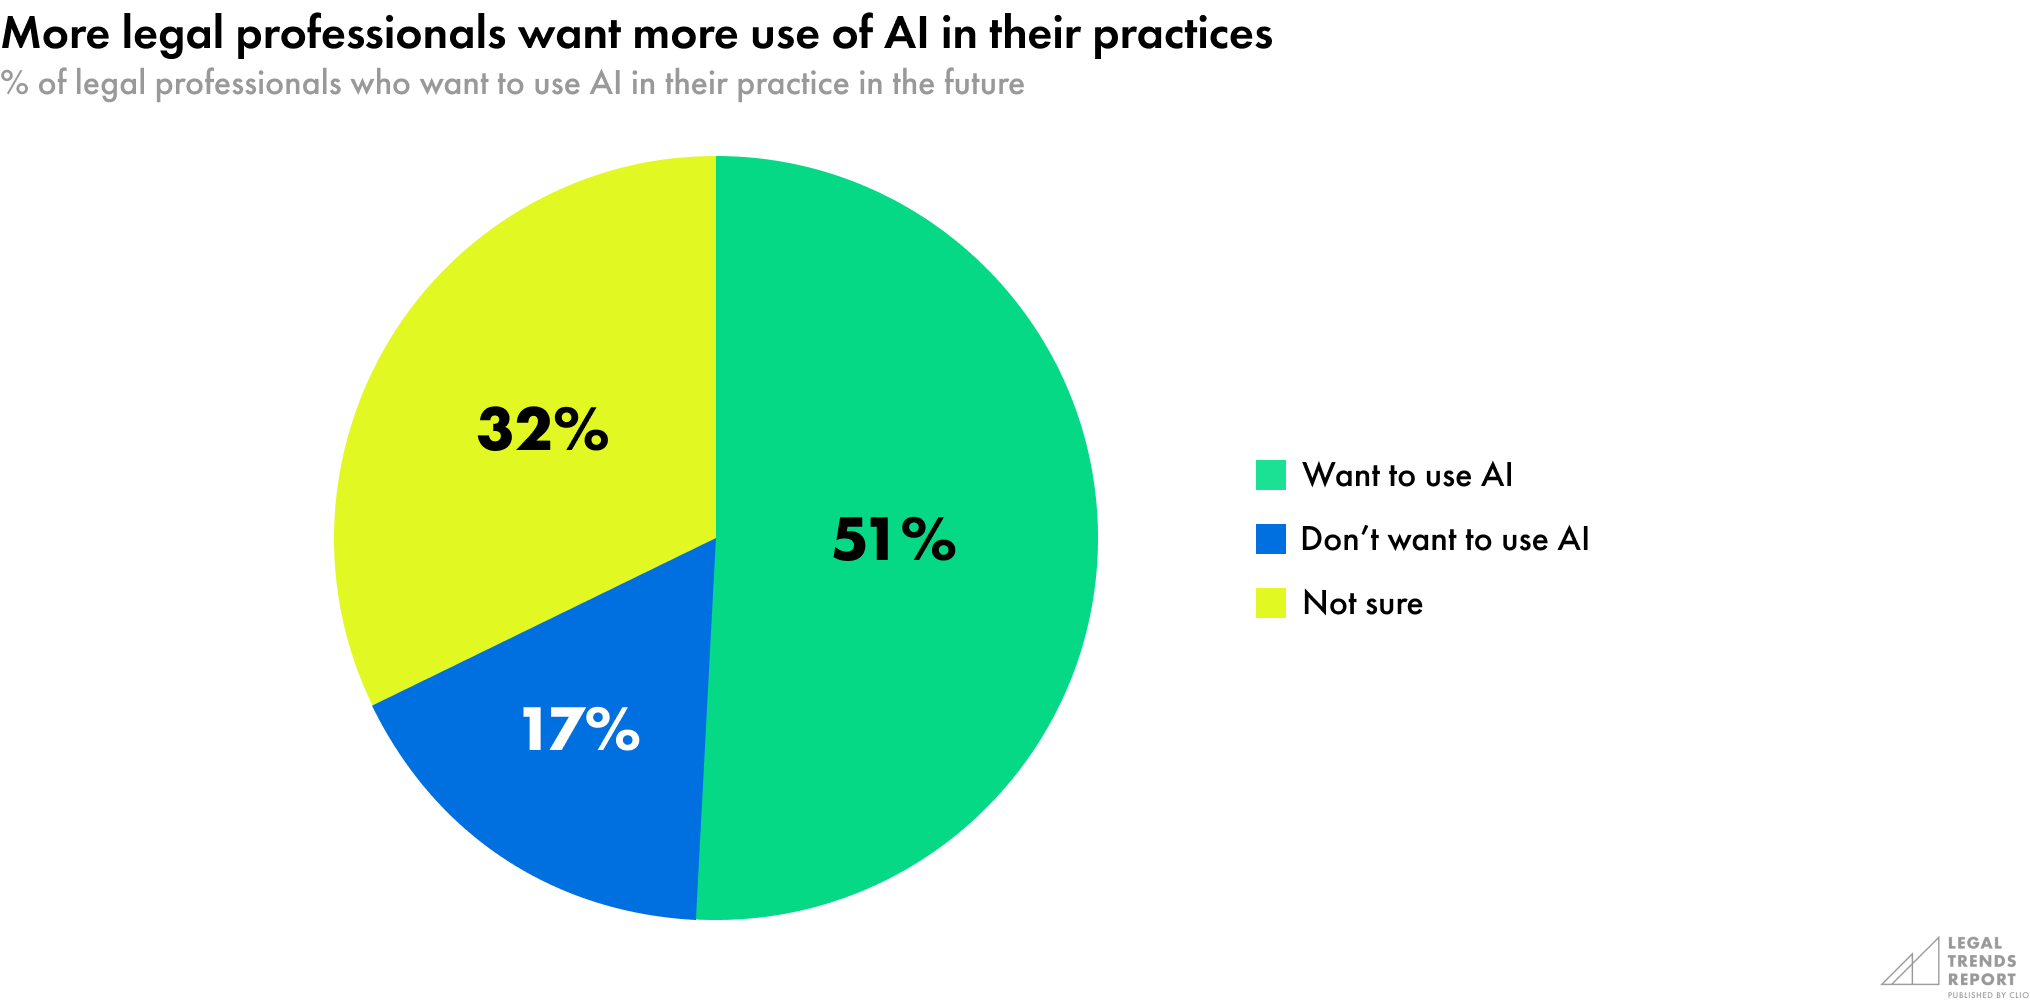 More legal professionals want more use of AI in their practices